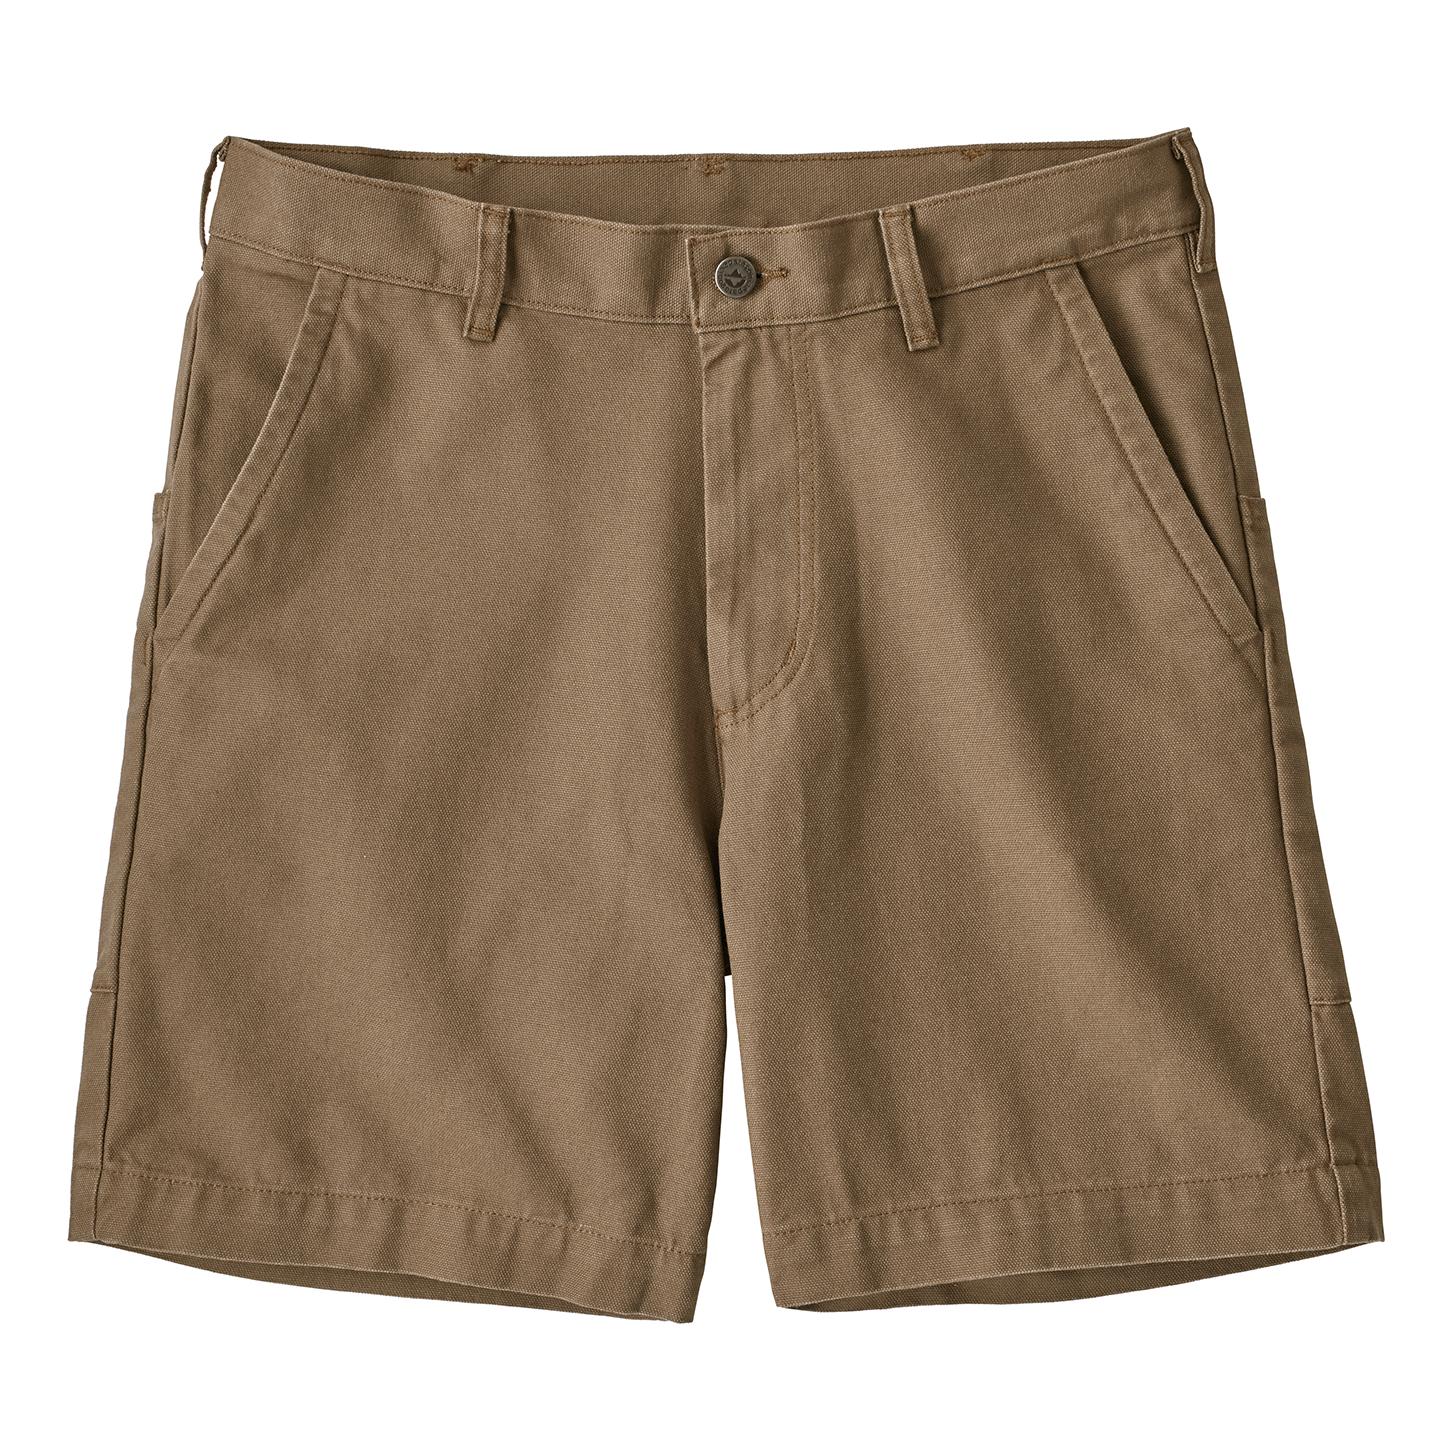 Patagonia Stand Up Shorts - 7 Inches Marron 30 